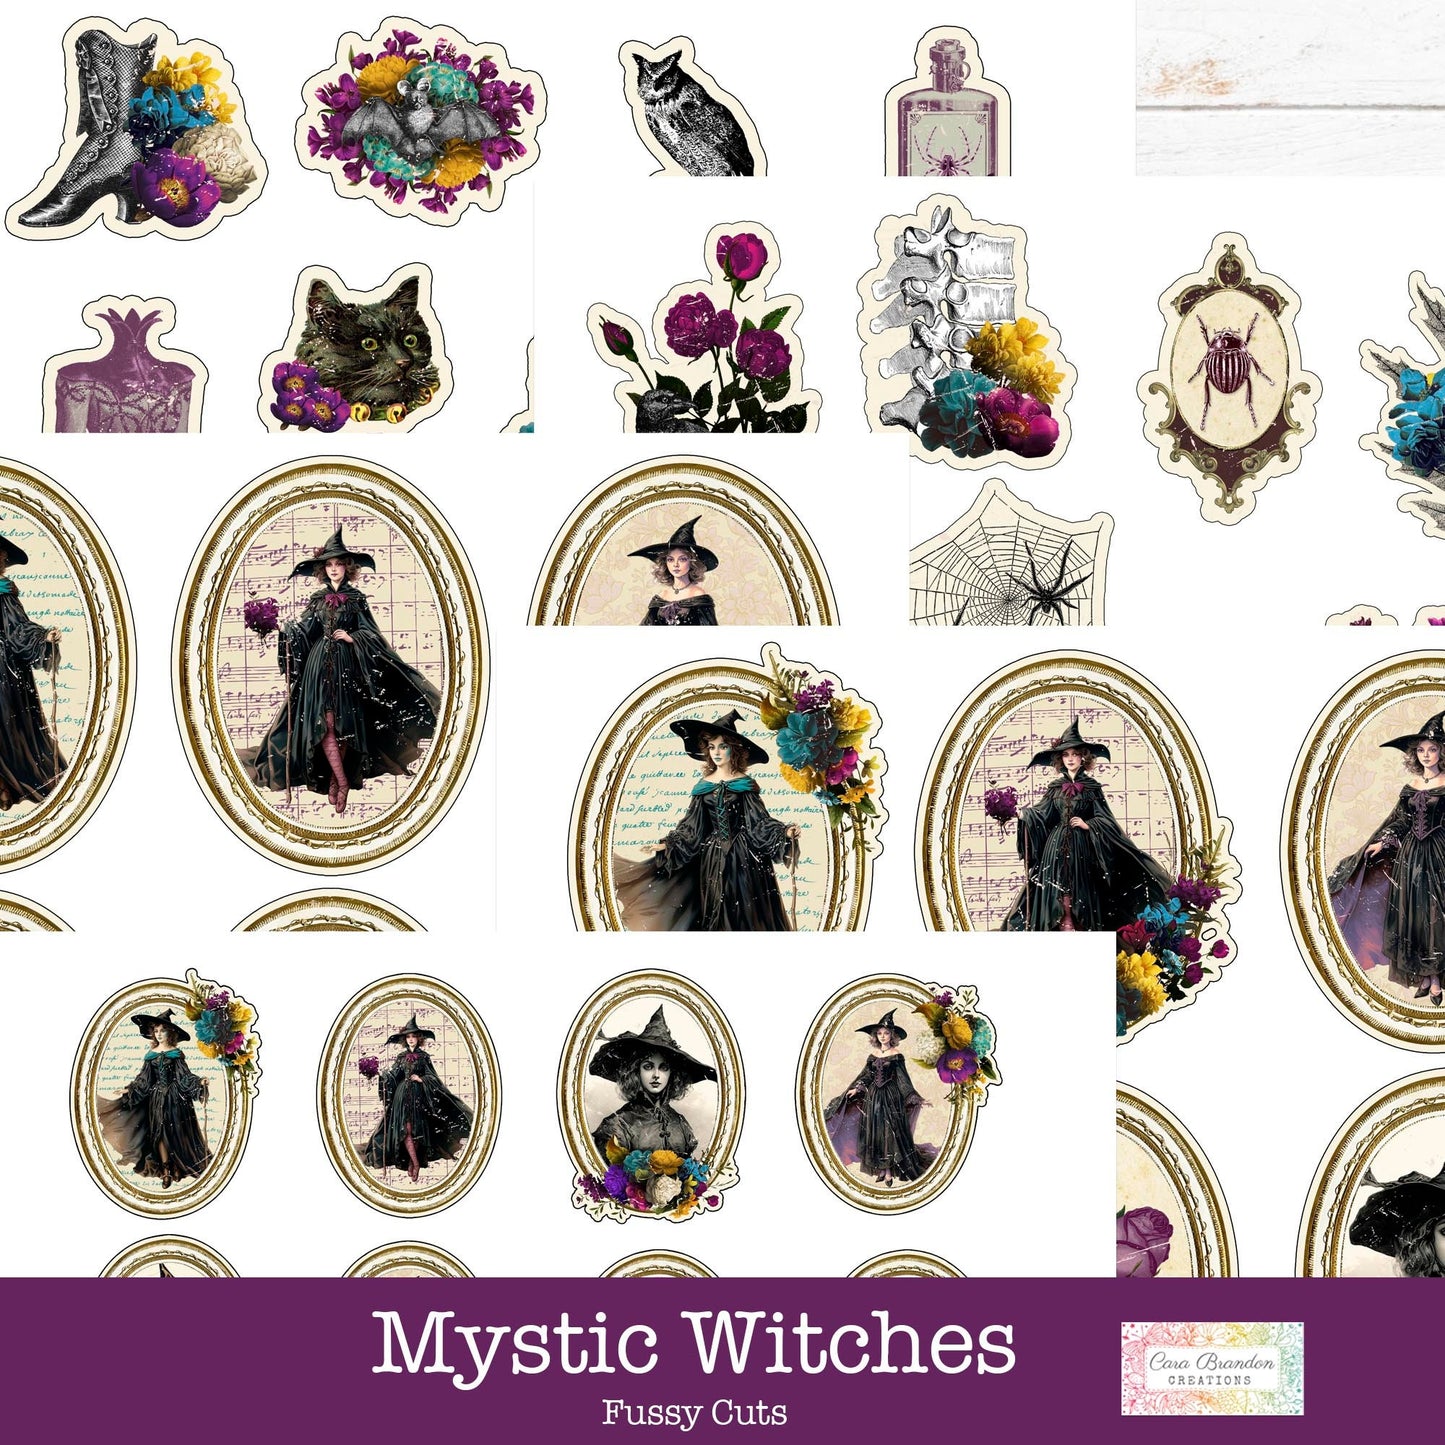 Mystic Witches Fussy Cuts